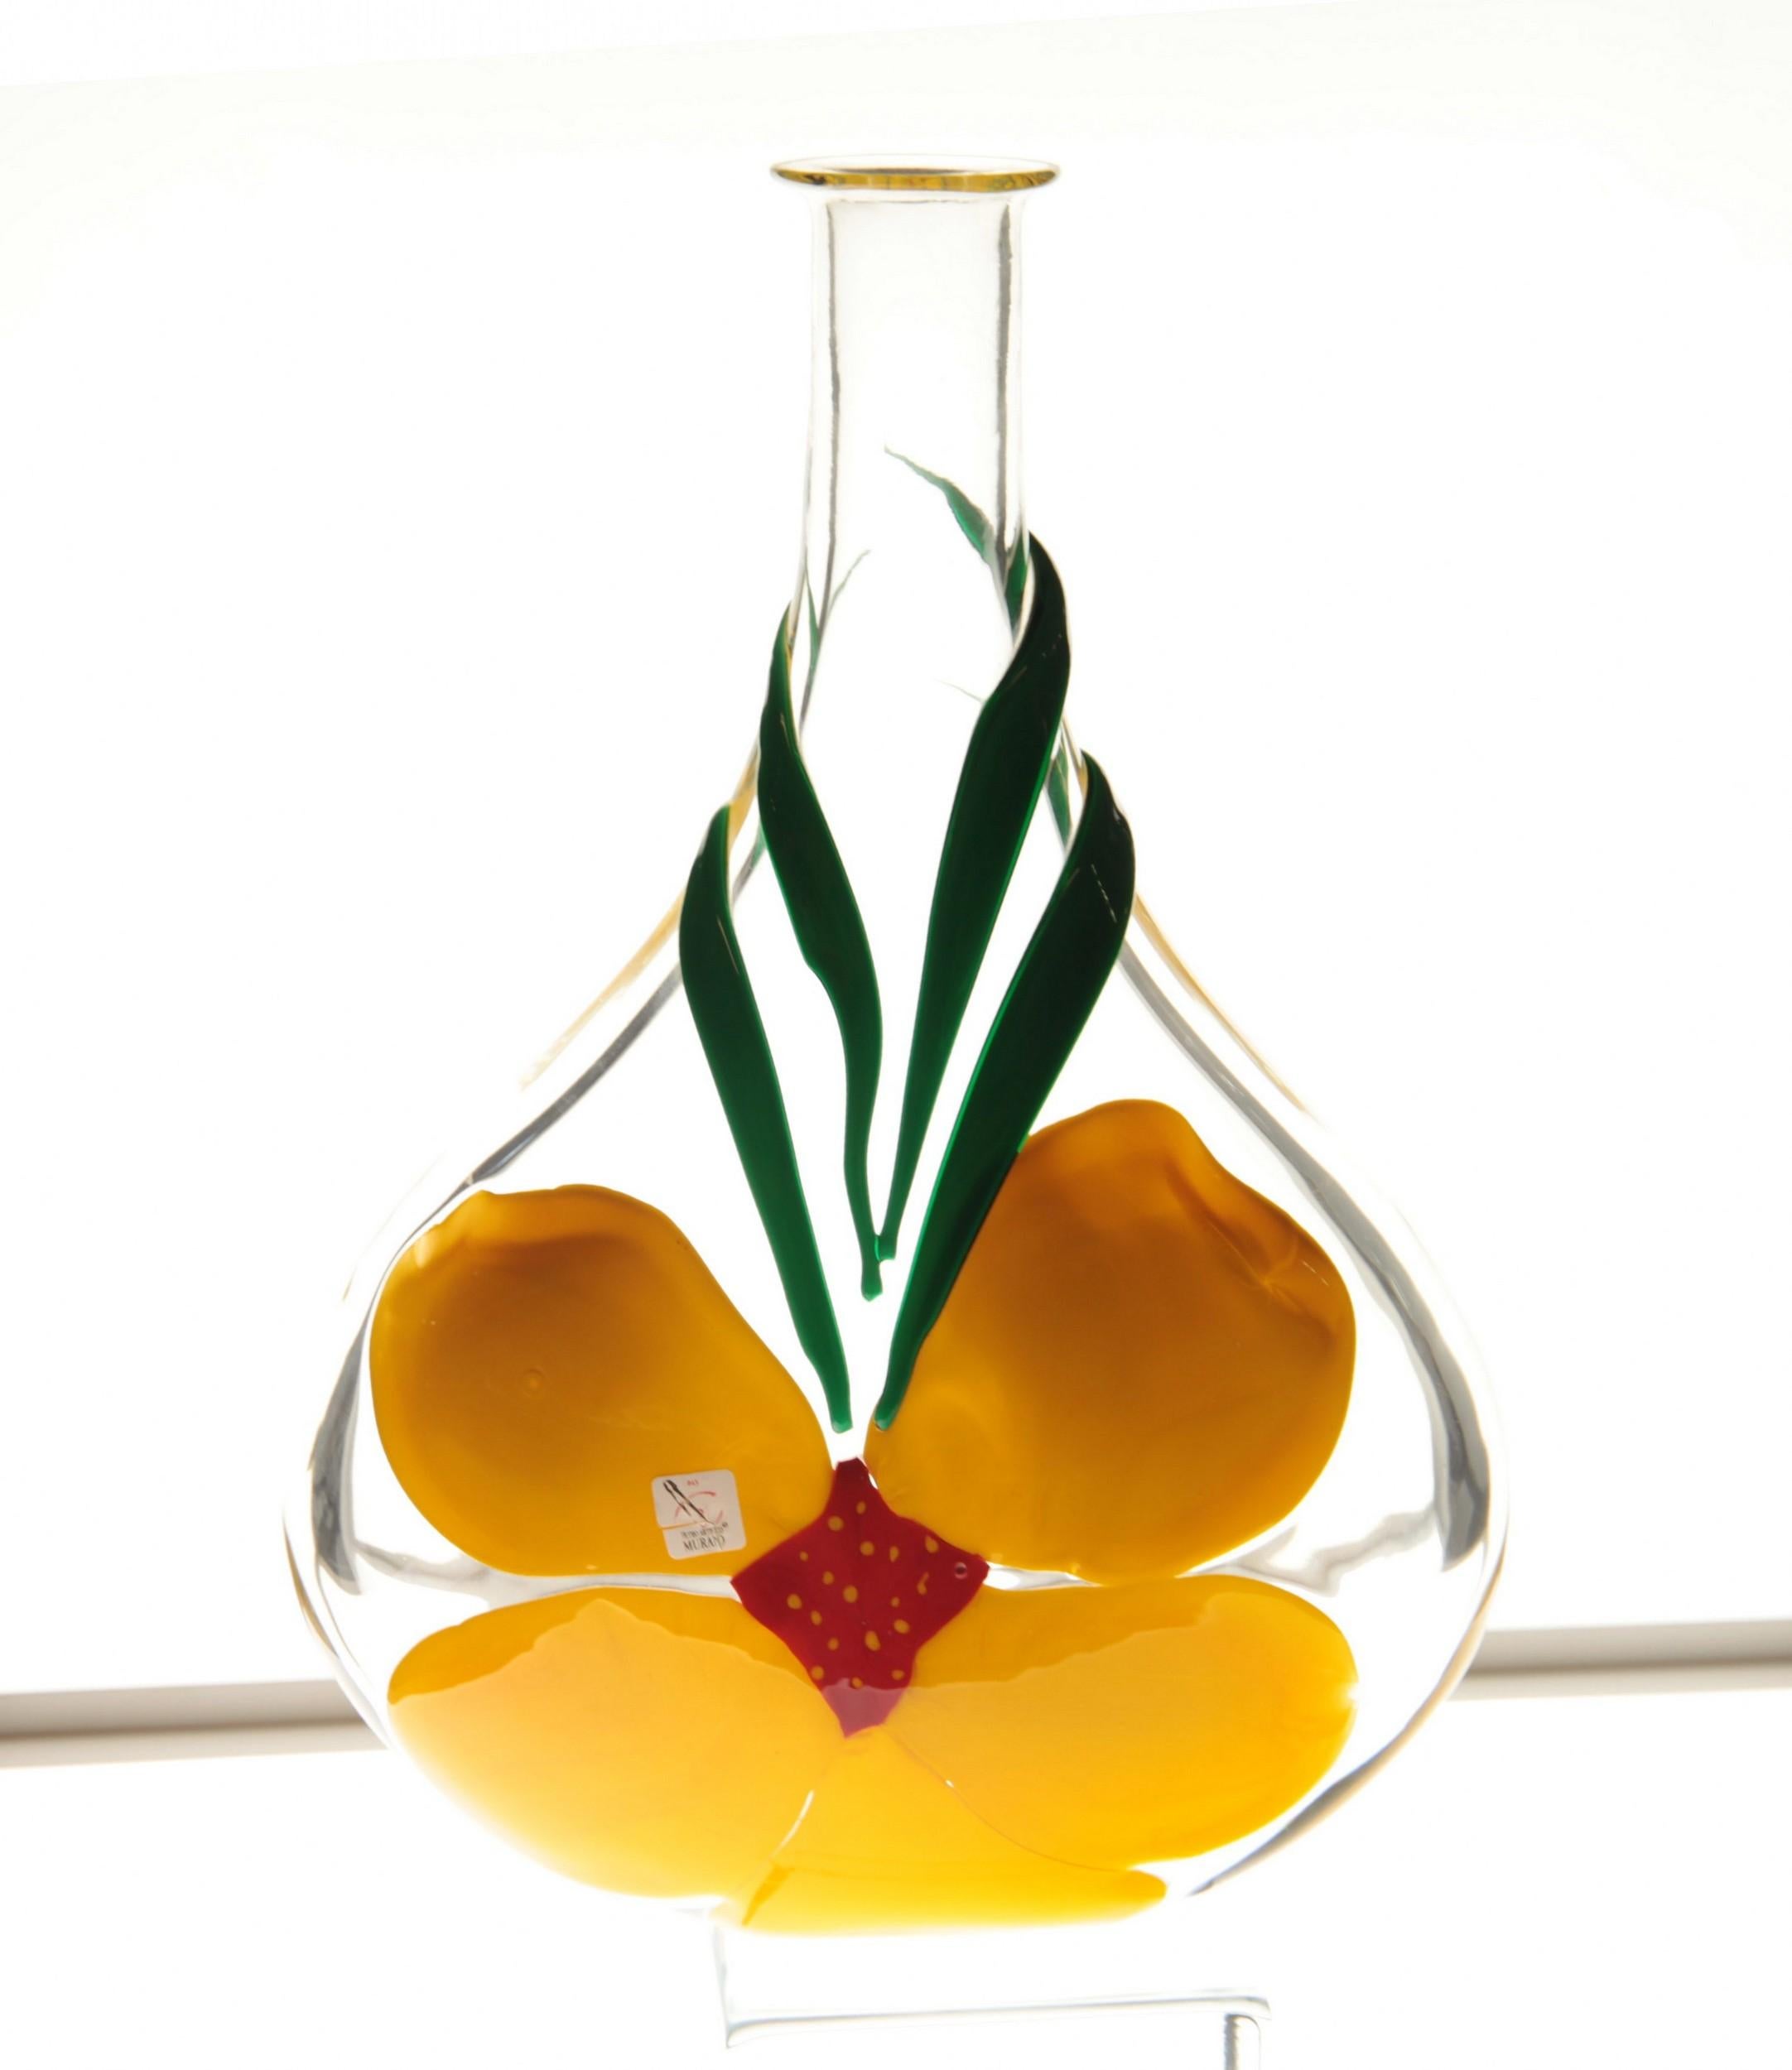 Singed Pauly vase with flask oval vase by Berit Johansson, Swedish designer who worked and works for top glass maker companies. She brings a freshness of design with her use of color and mostly flower subjects.
The design is made with pate de verre